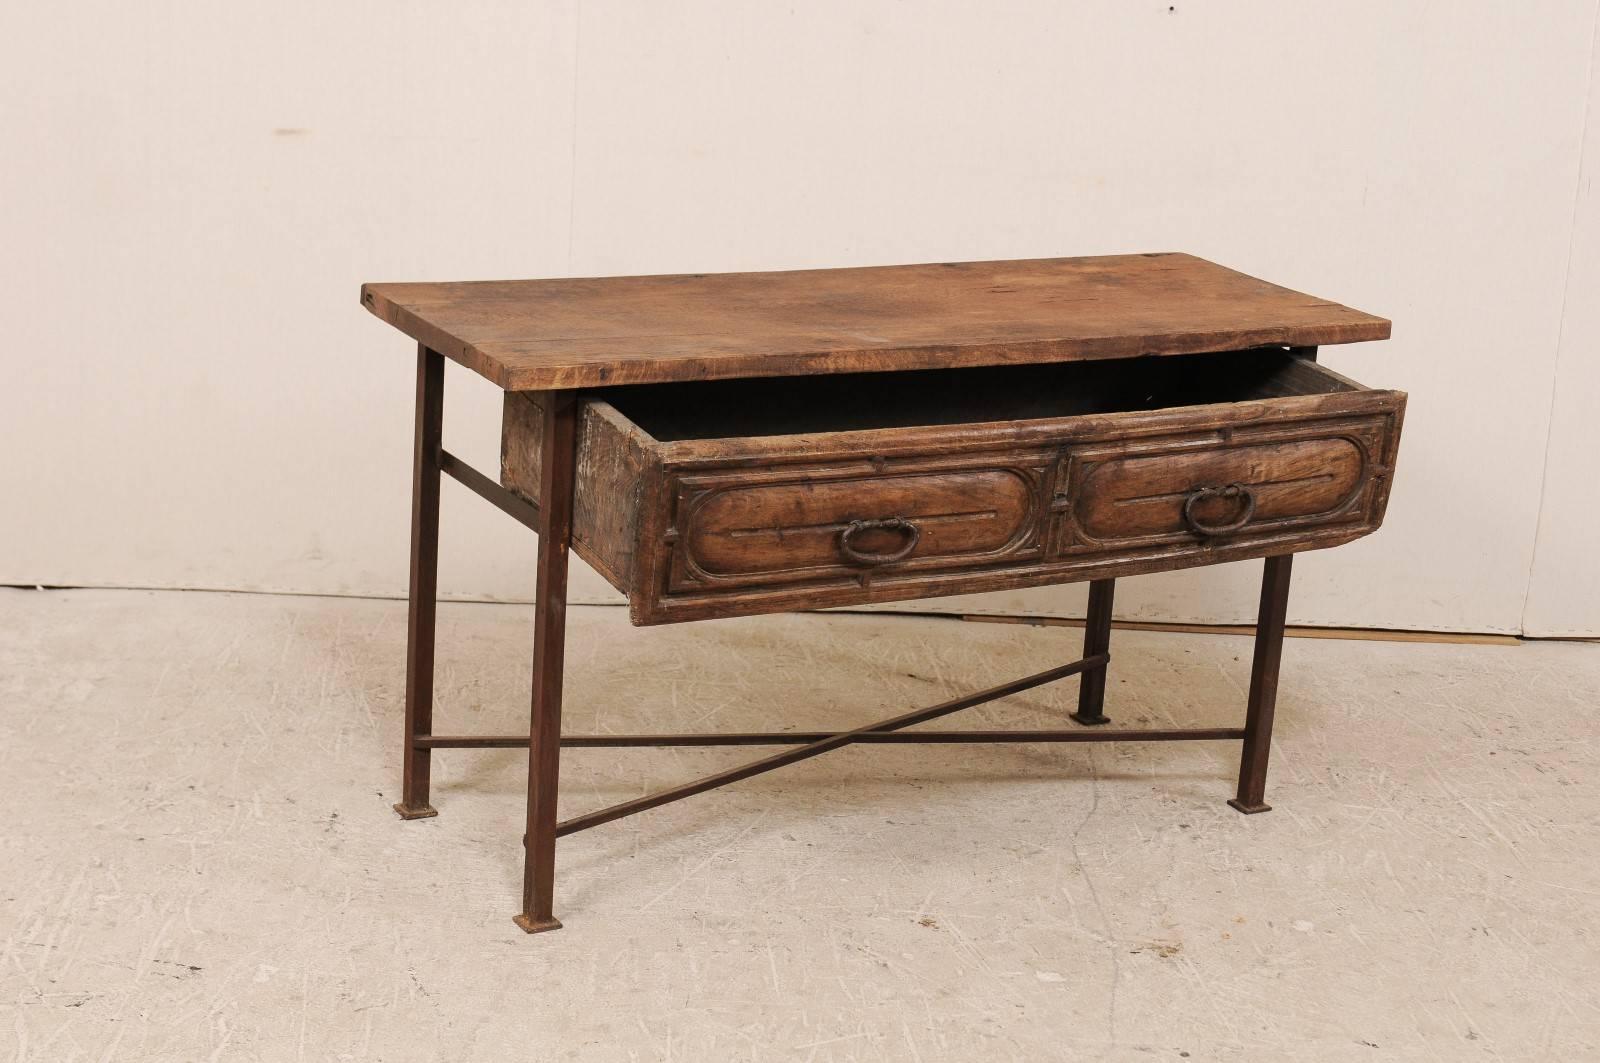 18th Century and Earlier 18th Century Spanish Rustic Wood and Iron Console Table with Spacious Drawer